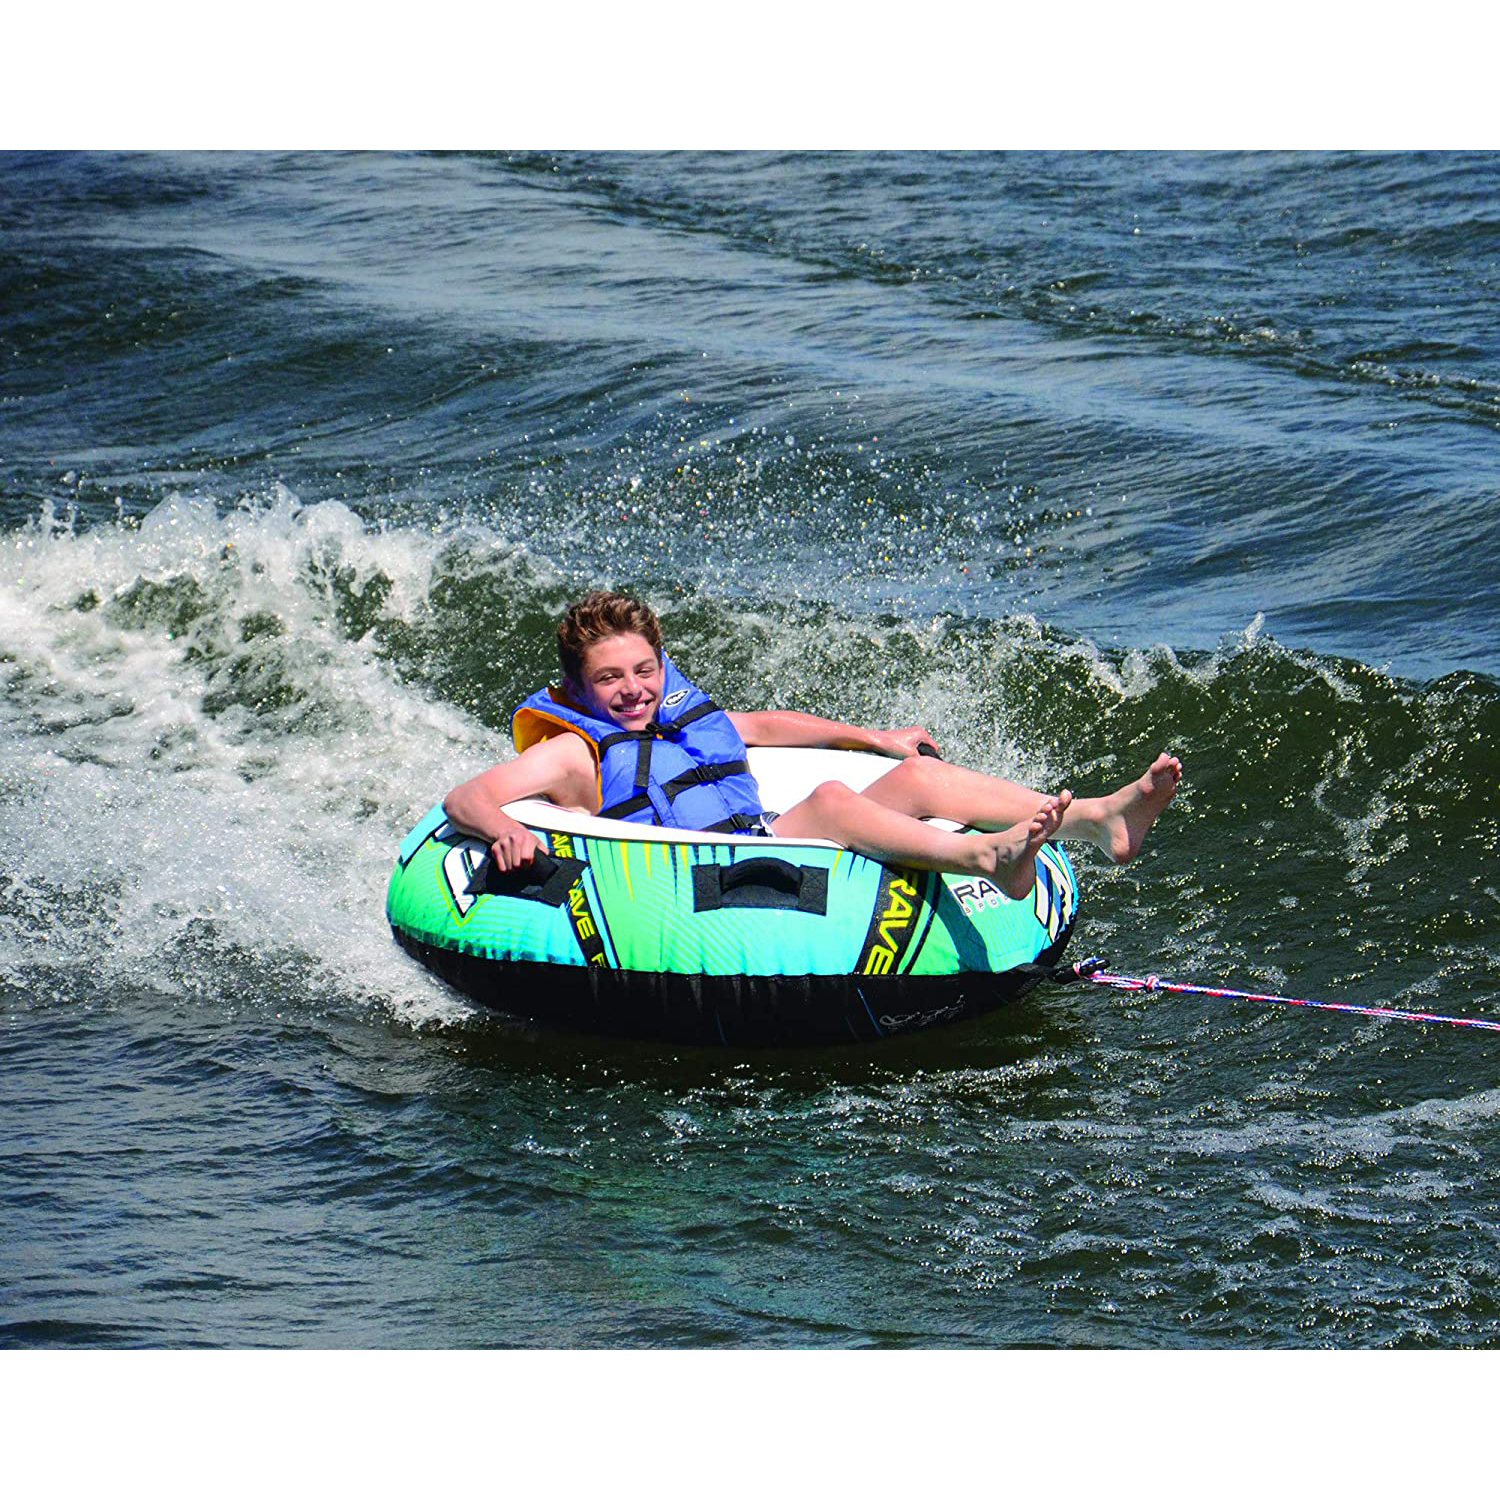 Blade 54 Inch 1 Rider Inflatable Boat Towable Water Ski Tube w/ 4 Handles, Blue - image 5 of 6